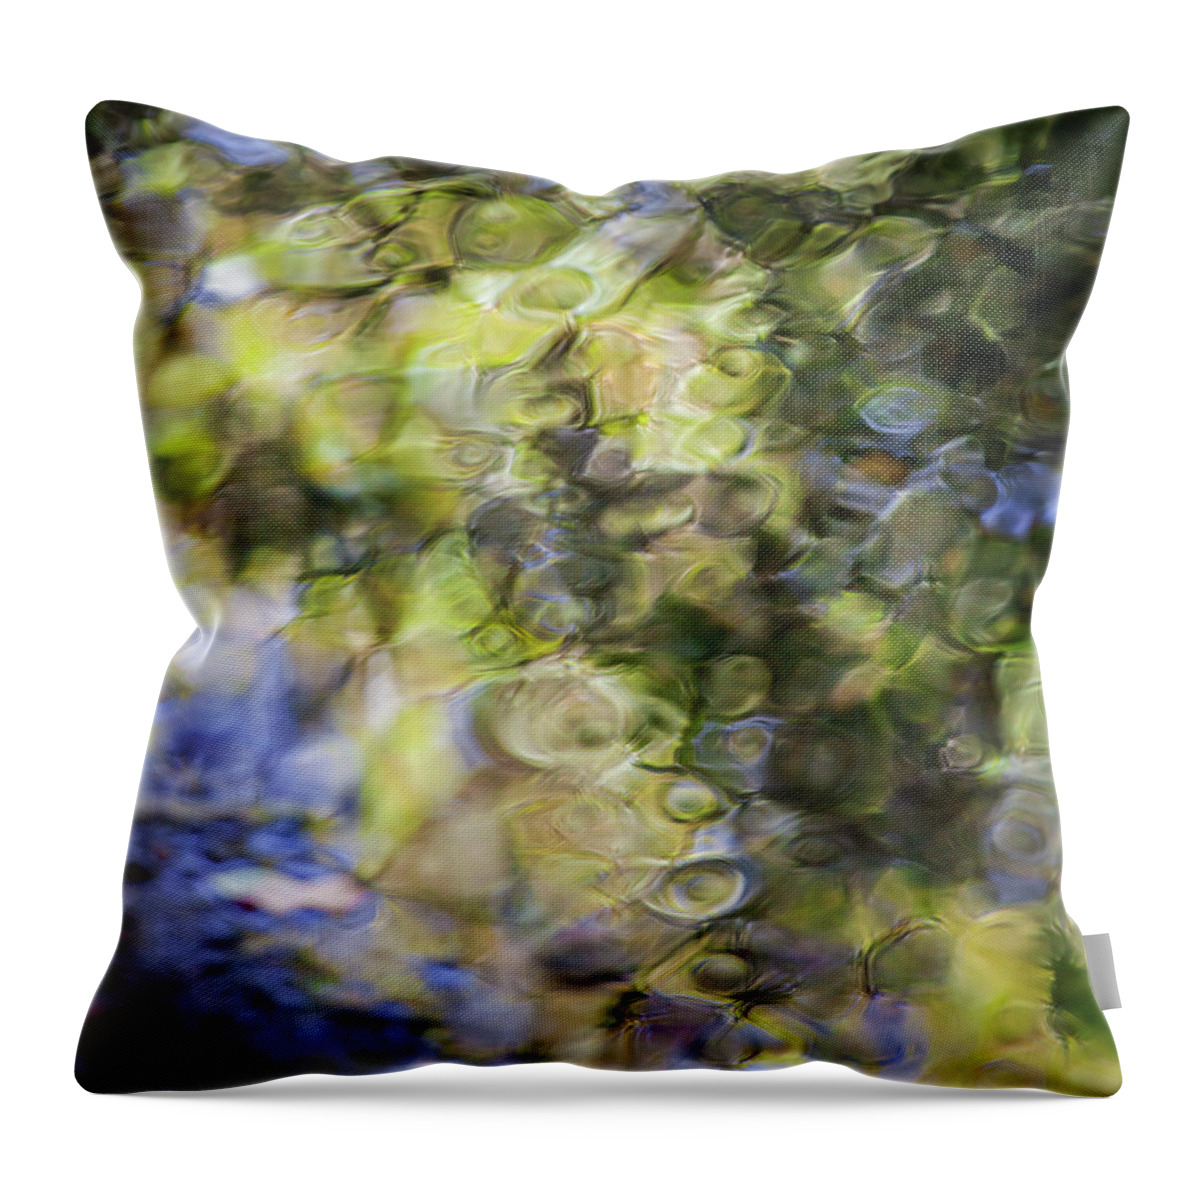 Reflective Abstract Water Throw Pillow featuring the photograph Reflective abstract water by Donald Kinney